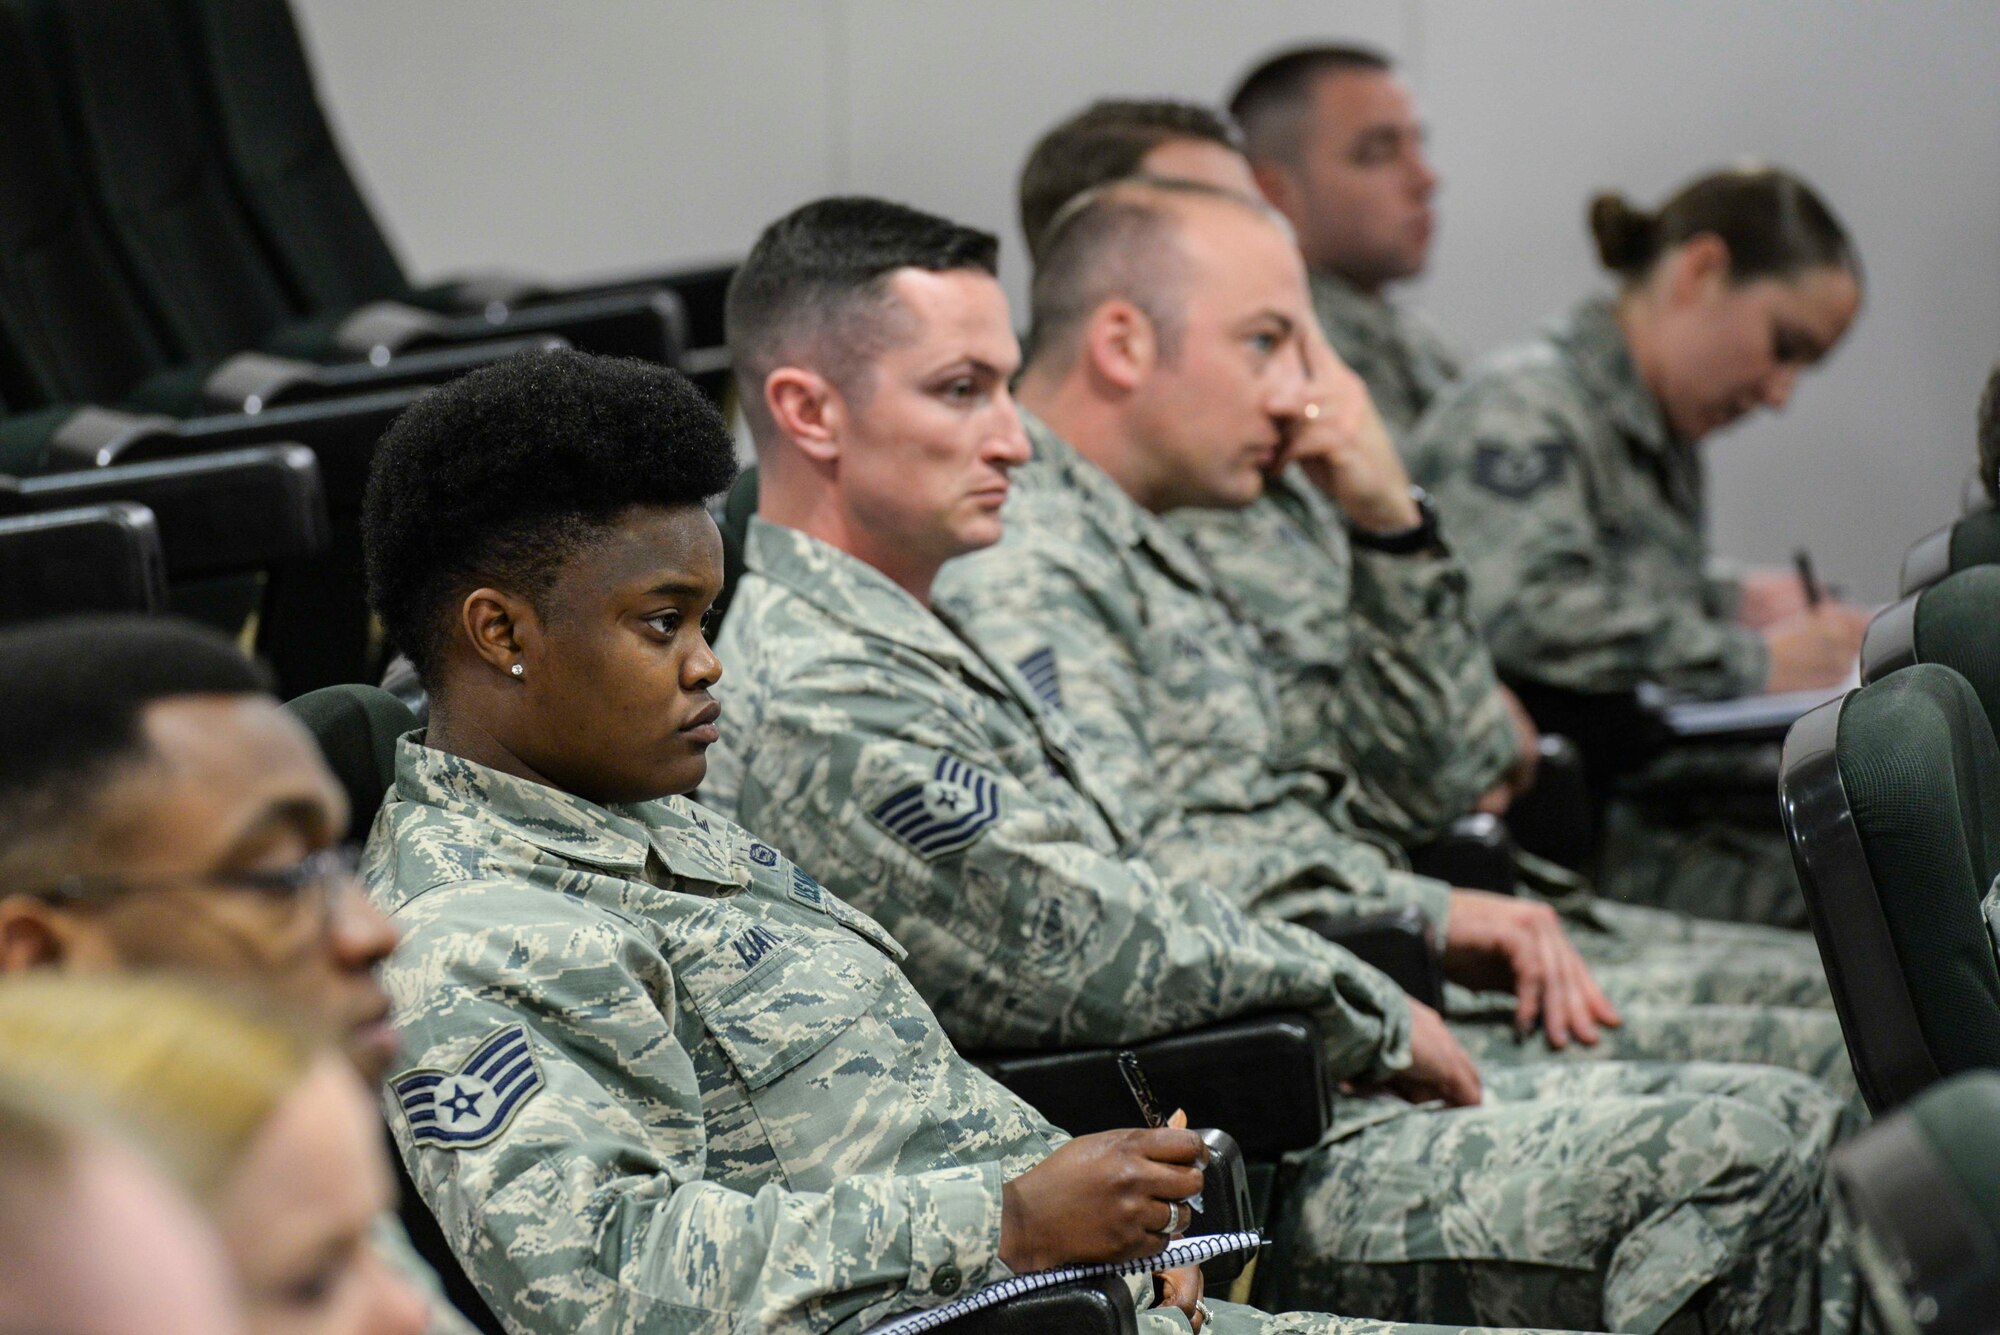 Noncommissioned officers listen in during a panel of senior noncommissioned officers at the second annual Atlantic Stripe Conference at the U.S. Air Forces in Europe and Air Forces Africa conference room on Ramstein Air Base, Germany, May 17, 2018. The professional development conference allowed NCOs time away from official duties to learn from leaders, mentors and guest speakers. (U.S. Air Force photo by Airman 1st Class D. Blake Browning)